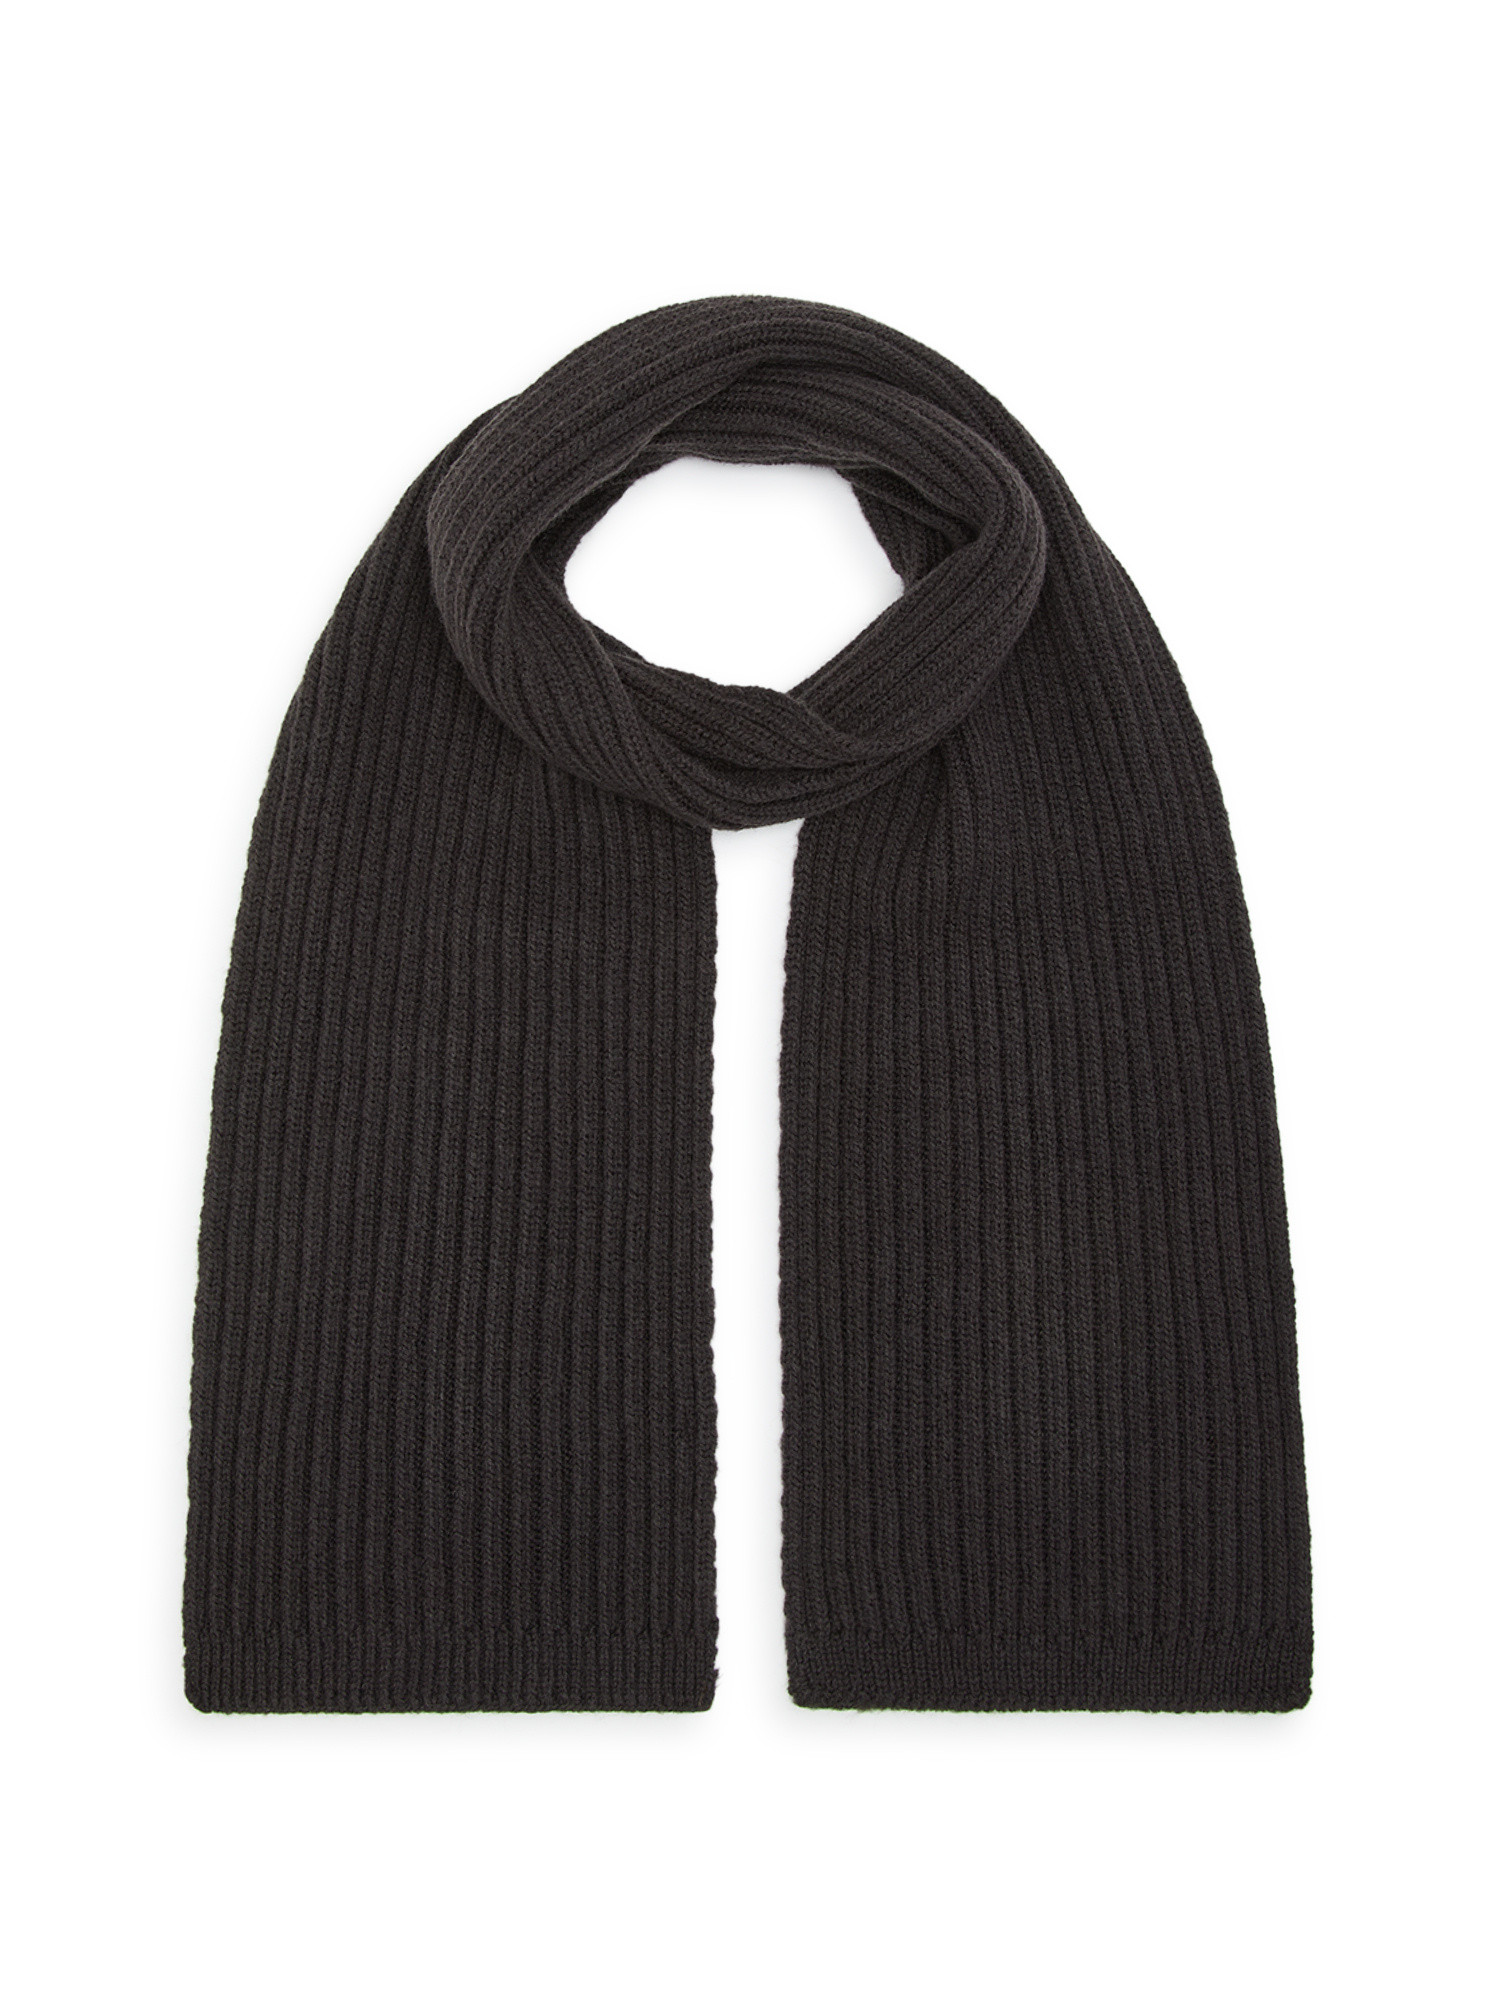 Luca D'Altieri - Ribbed scarf in pure wool, Dark Brown, large image number 0